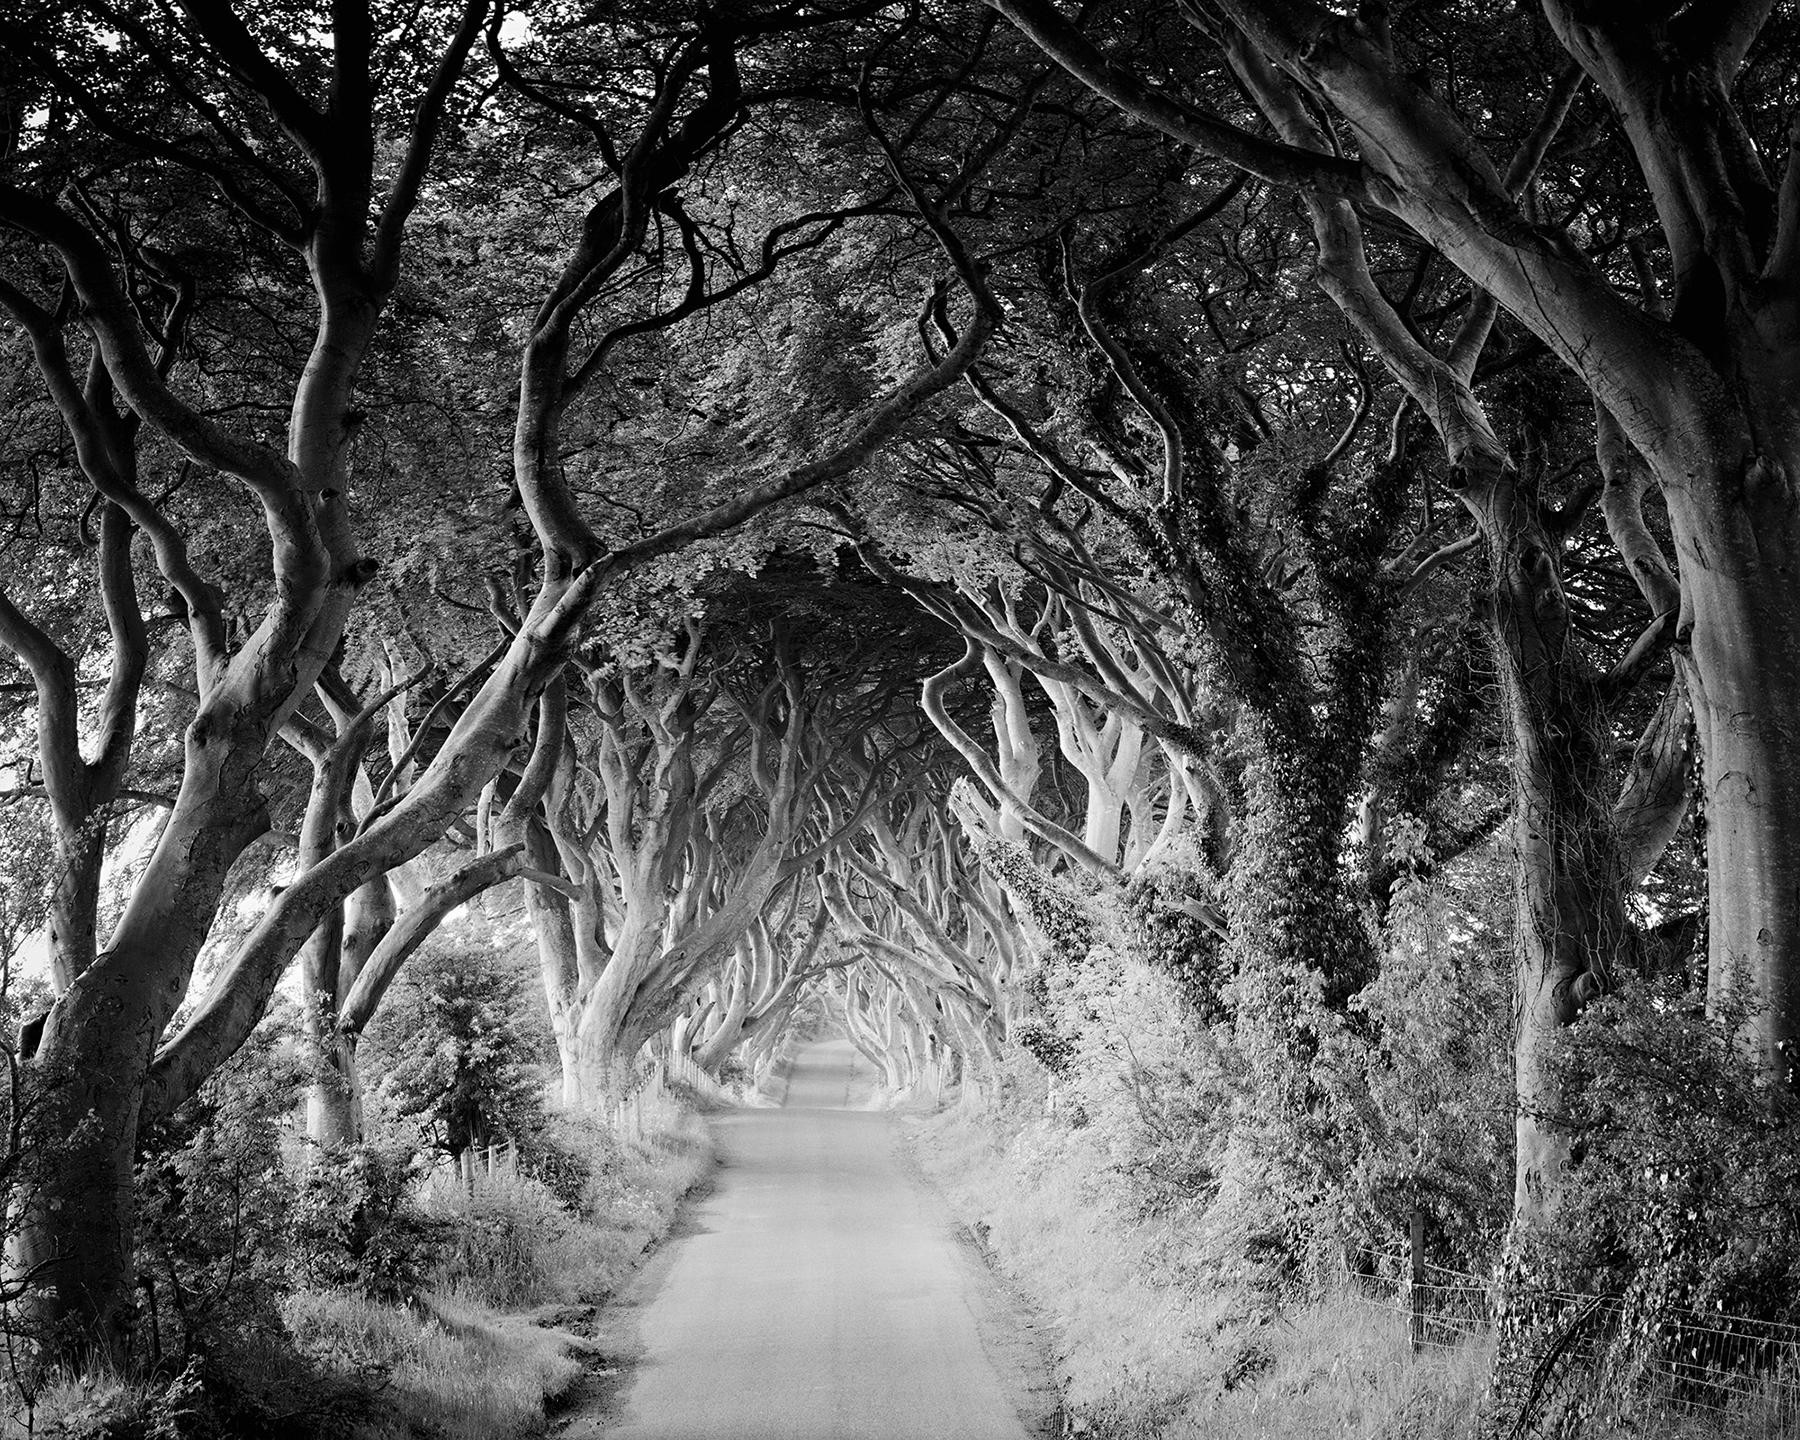 Black and White Photograph Gerald Berghammer - Dark Hedges, beeche, trees, Ireland, black and white art landscape photography